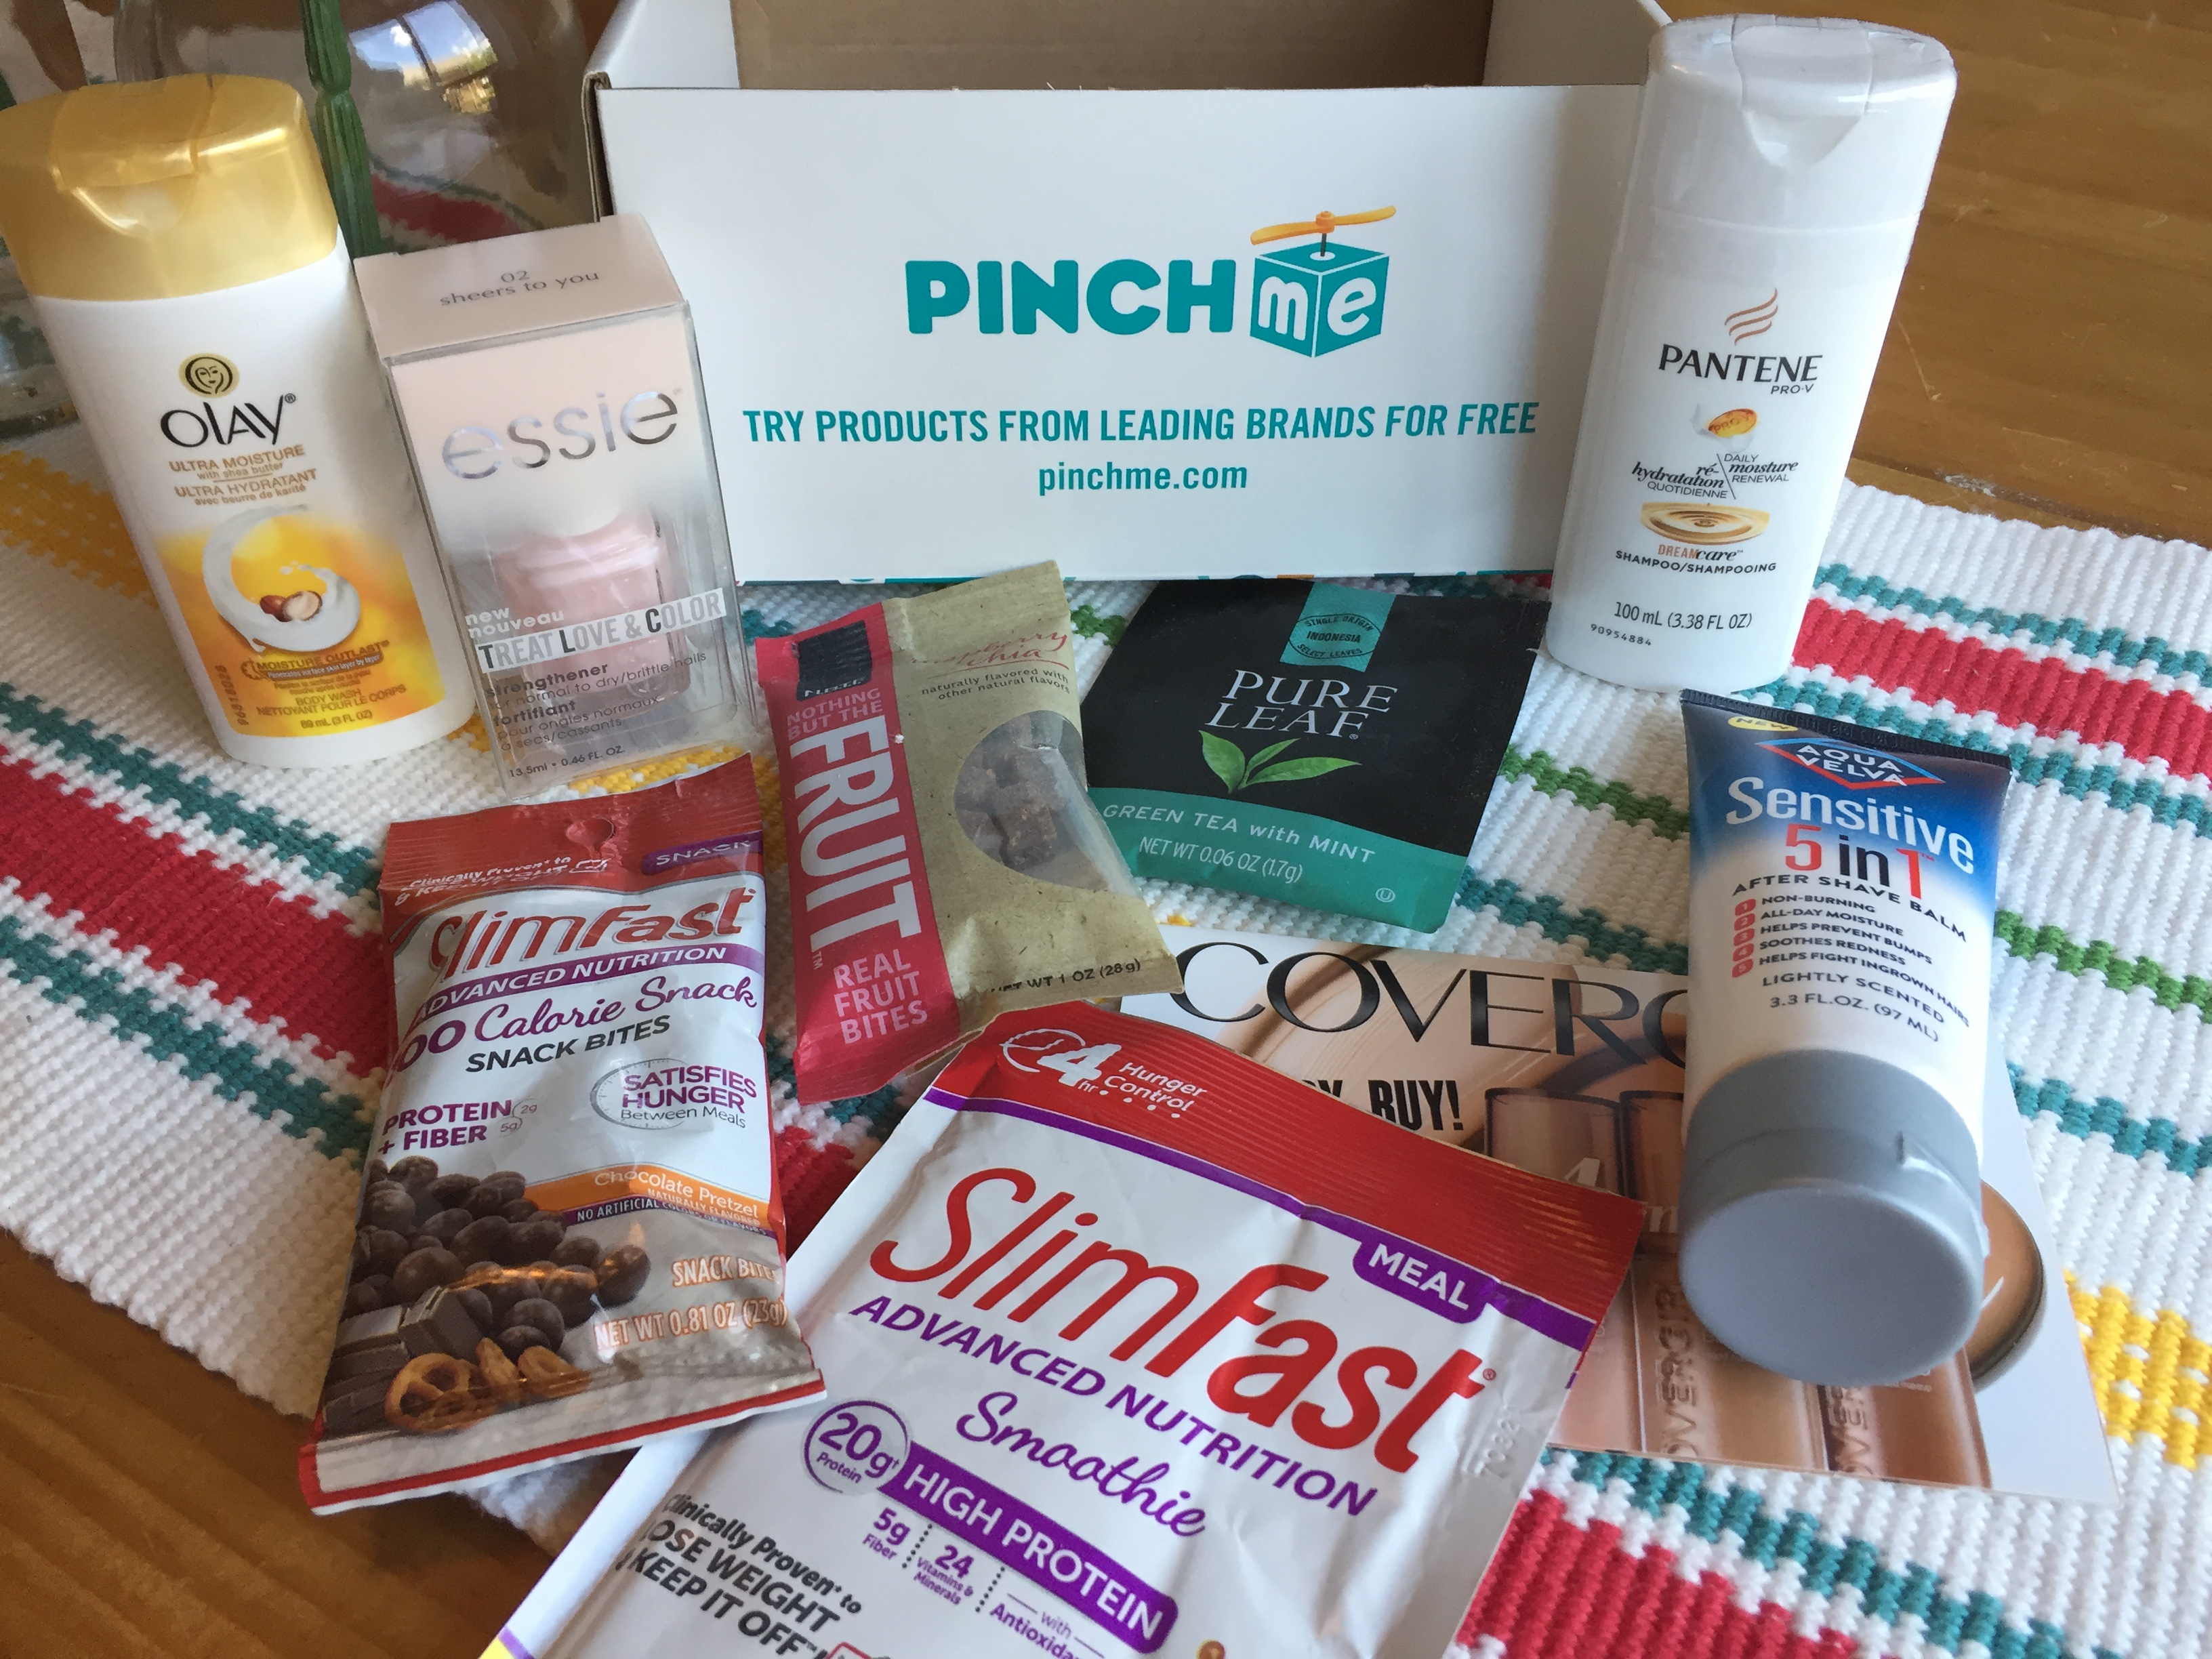 Free Samples from PinchMe on April 11 at 11am CT